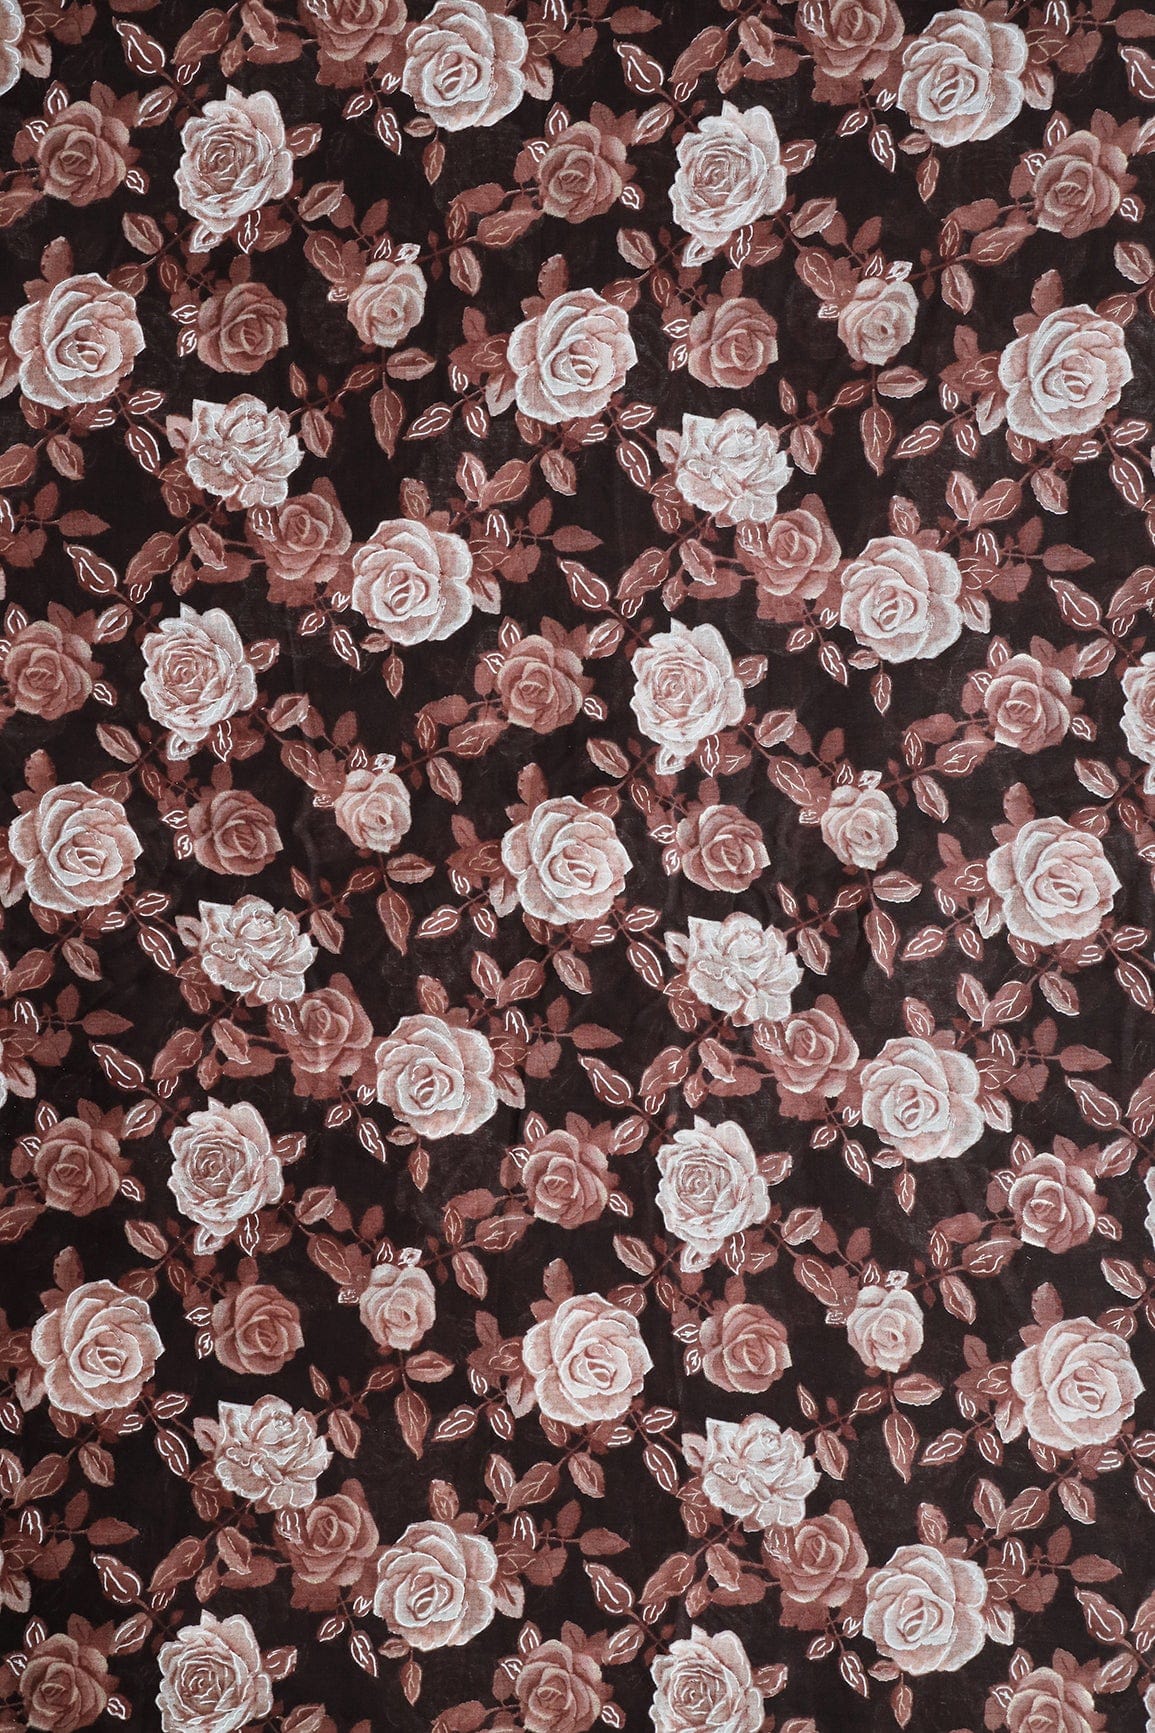 doeraa Prints White And Light Brown Floral Foil Print On Dark Brown Pure Mul Cotton Fabric